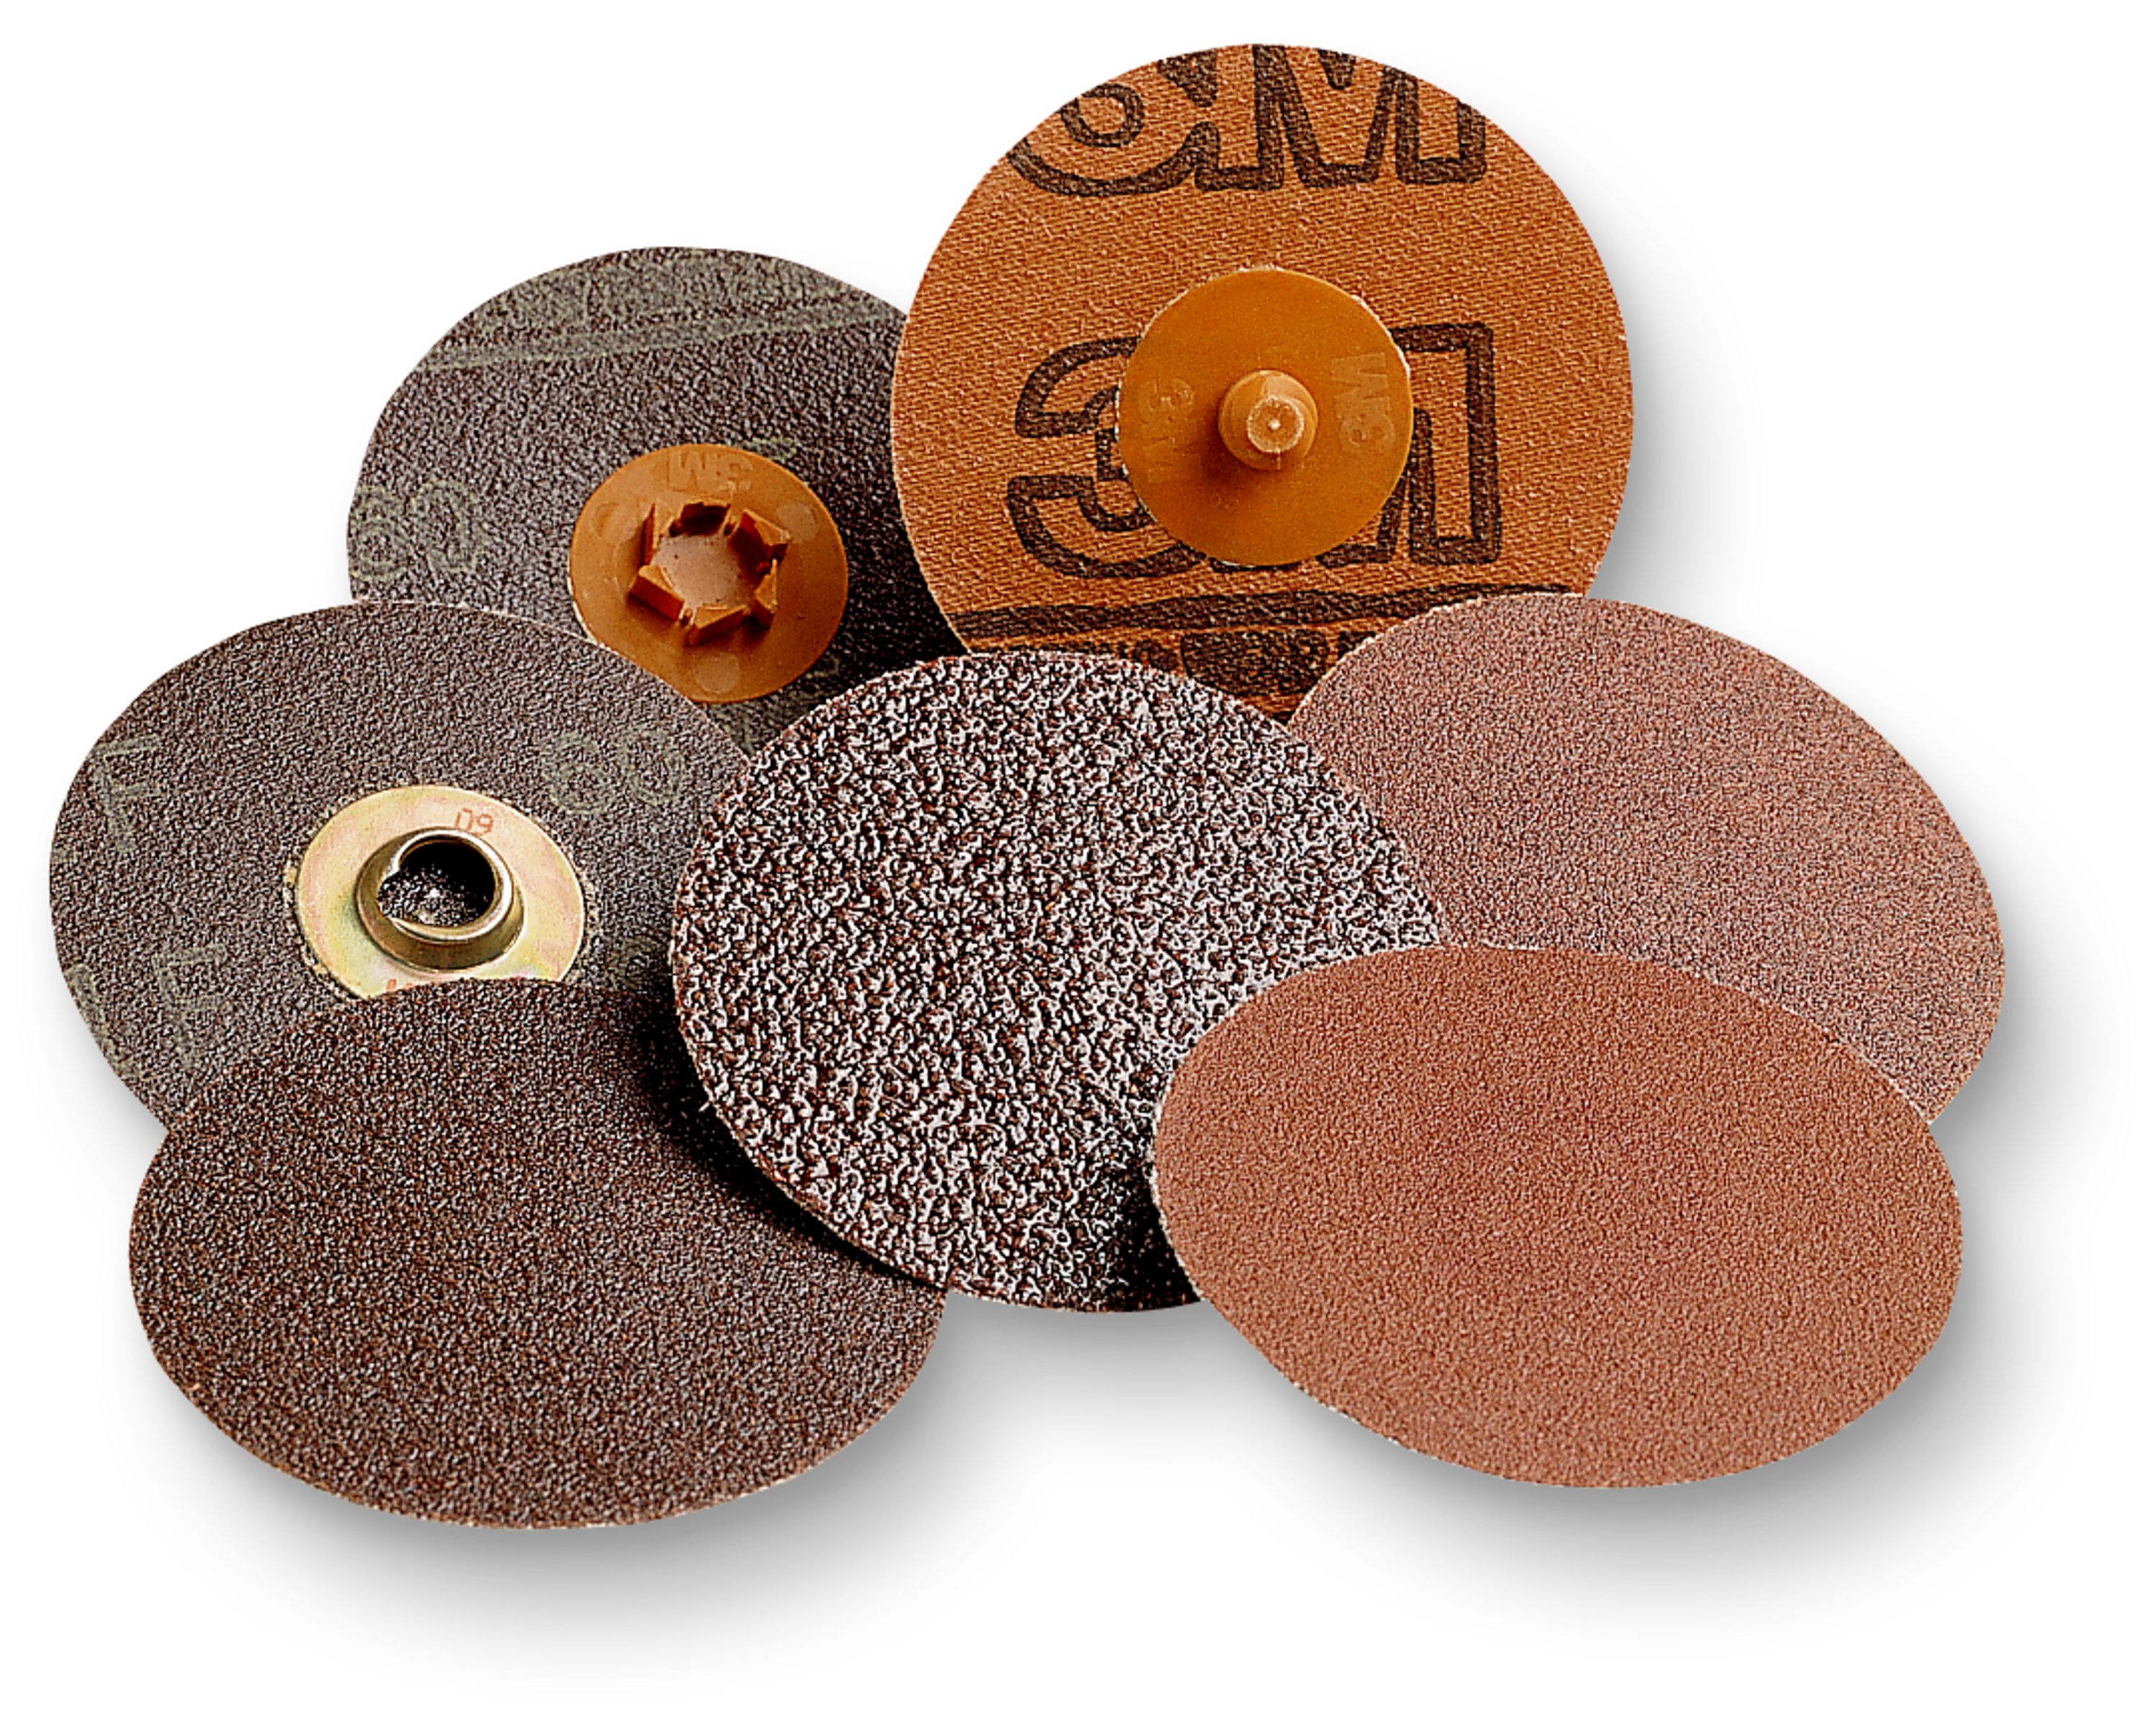 Aluminum oxide is suitable for a wide variety of materials in both woodworking and metalworking, including ferrous alloys.